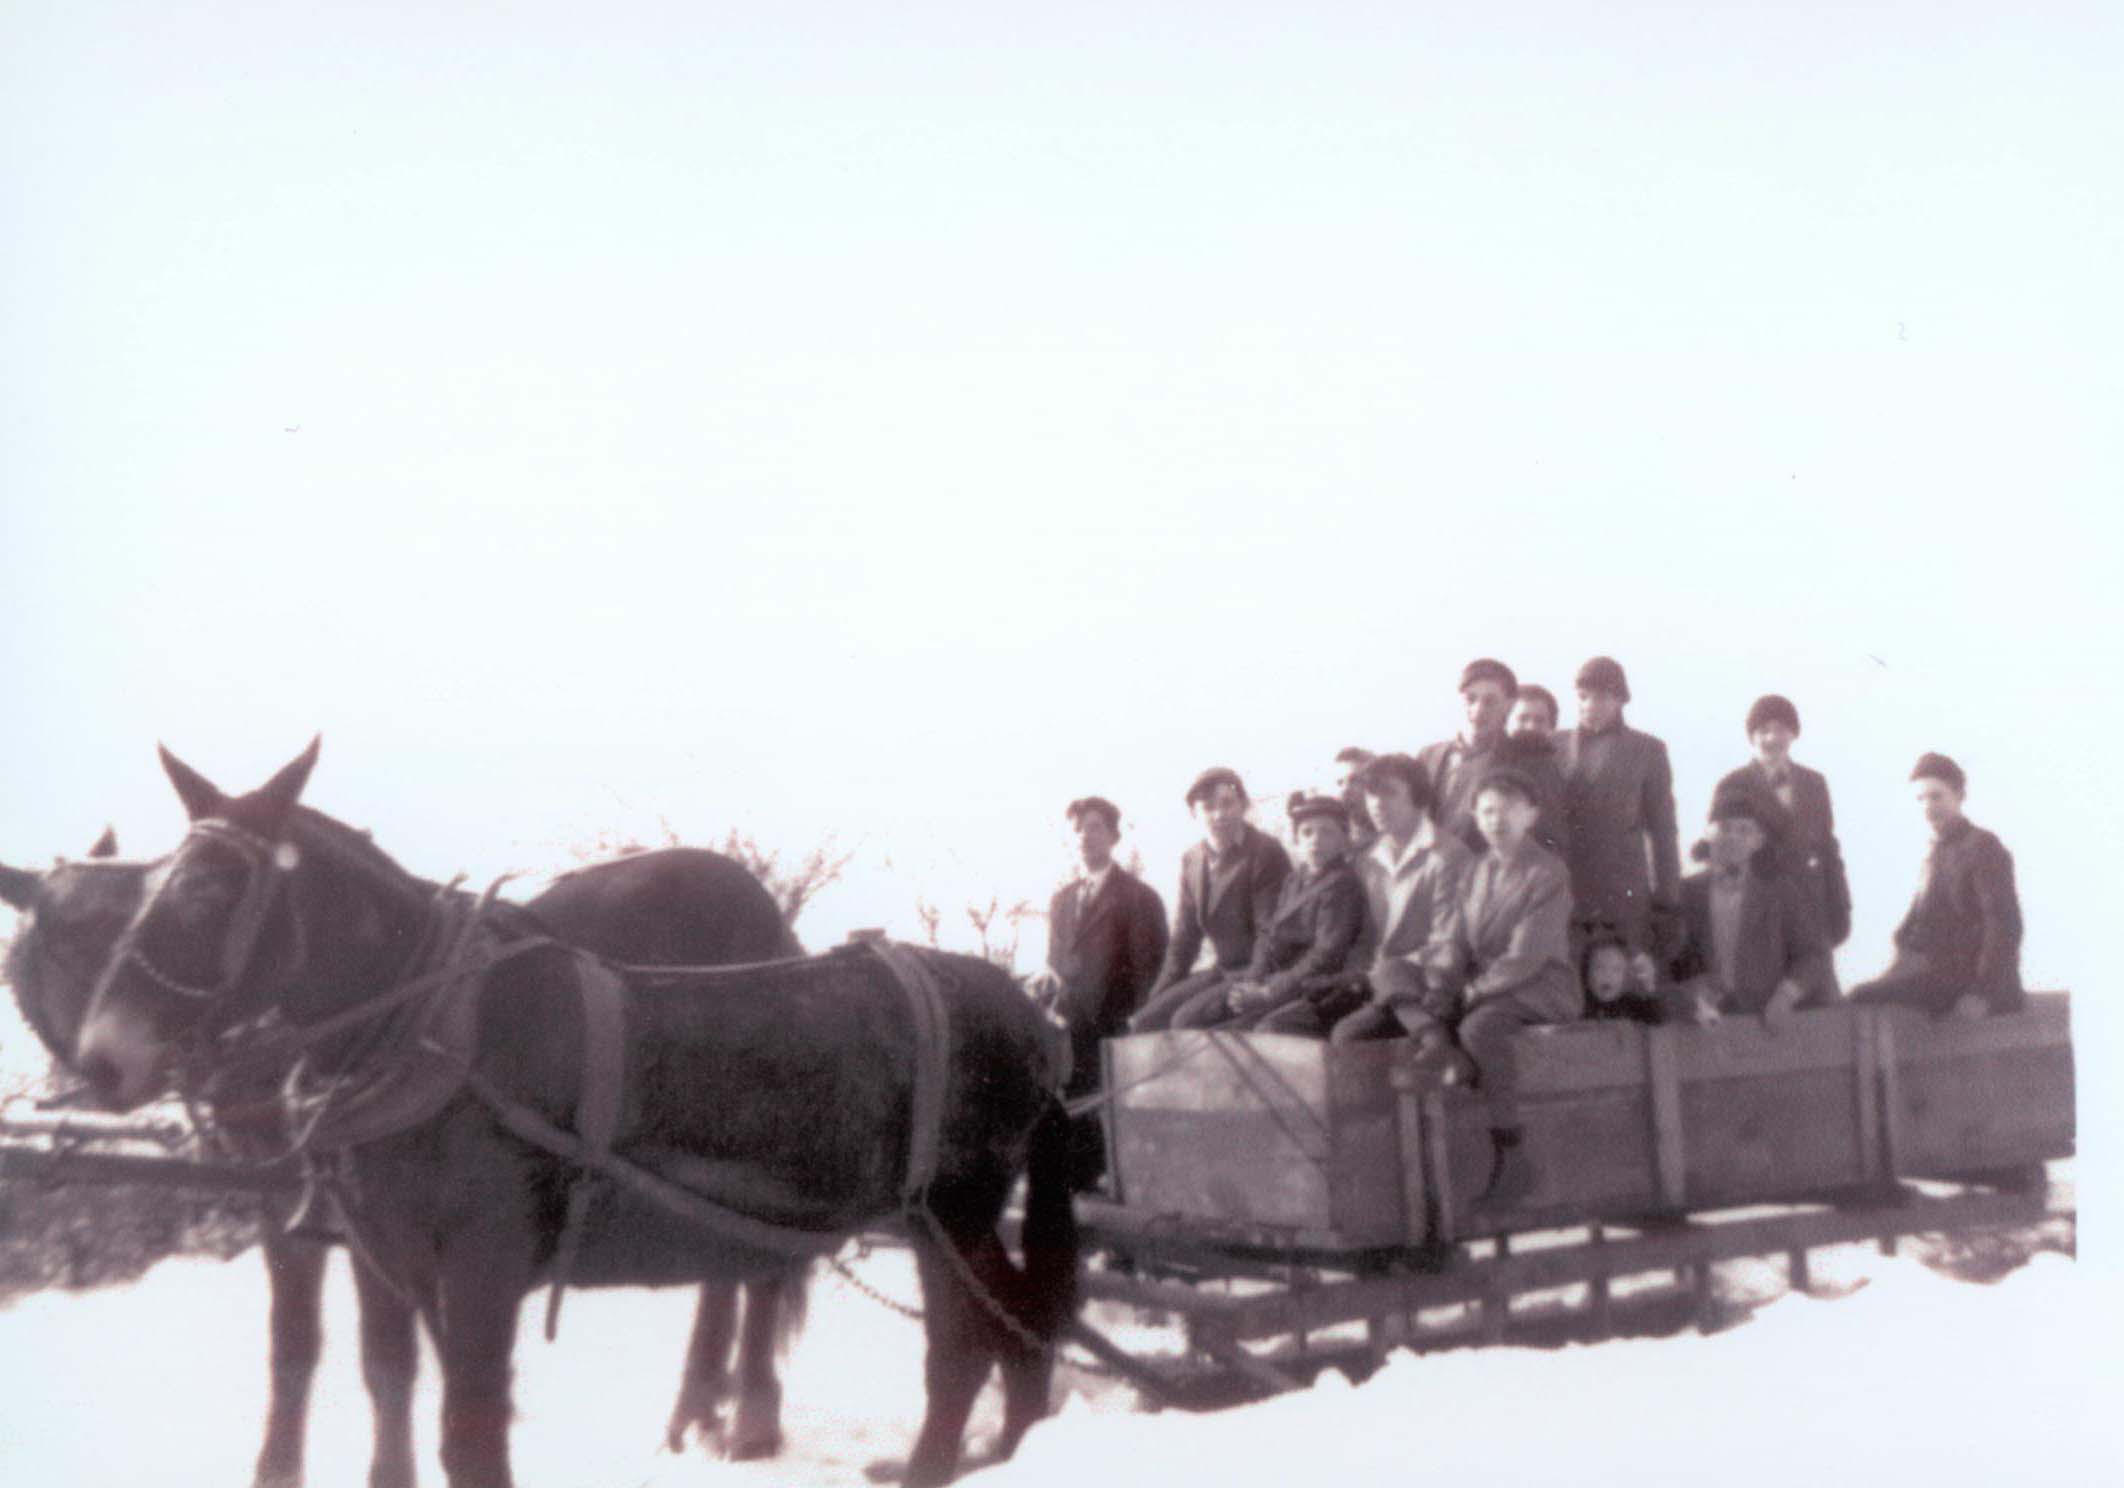 Sleigh riding during the winter